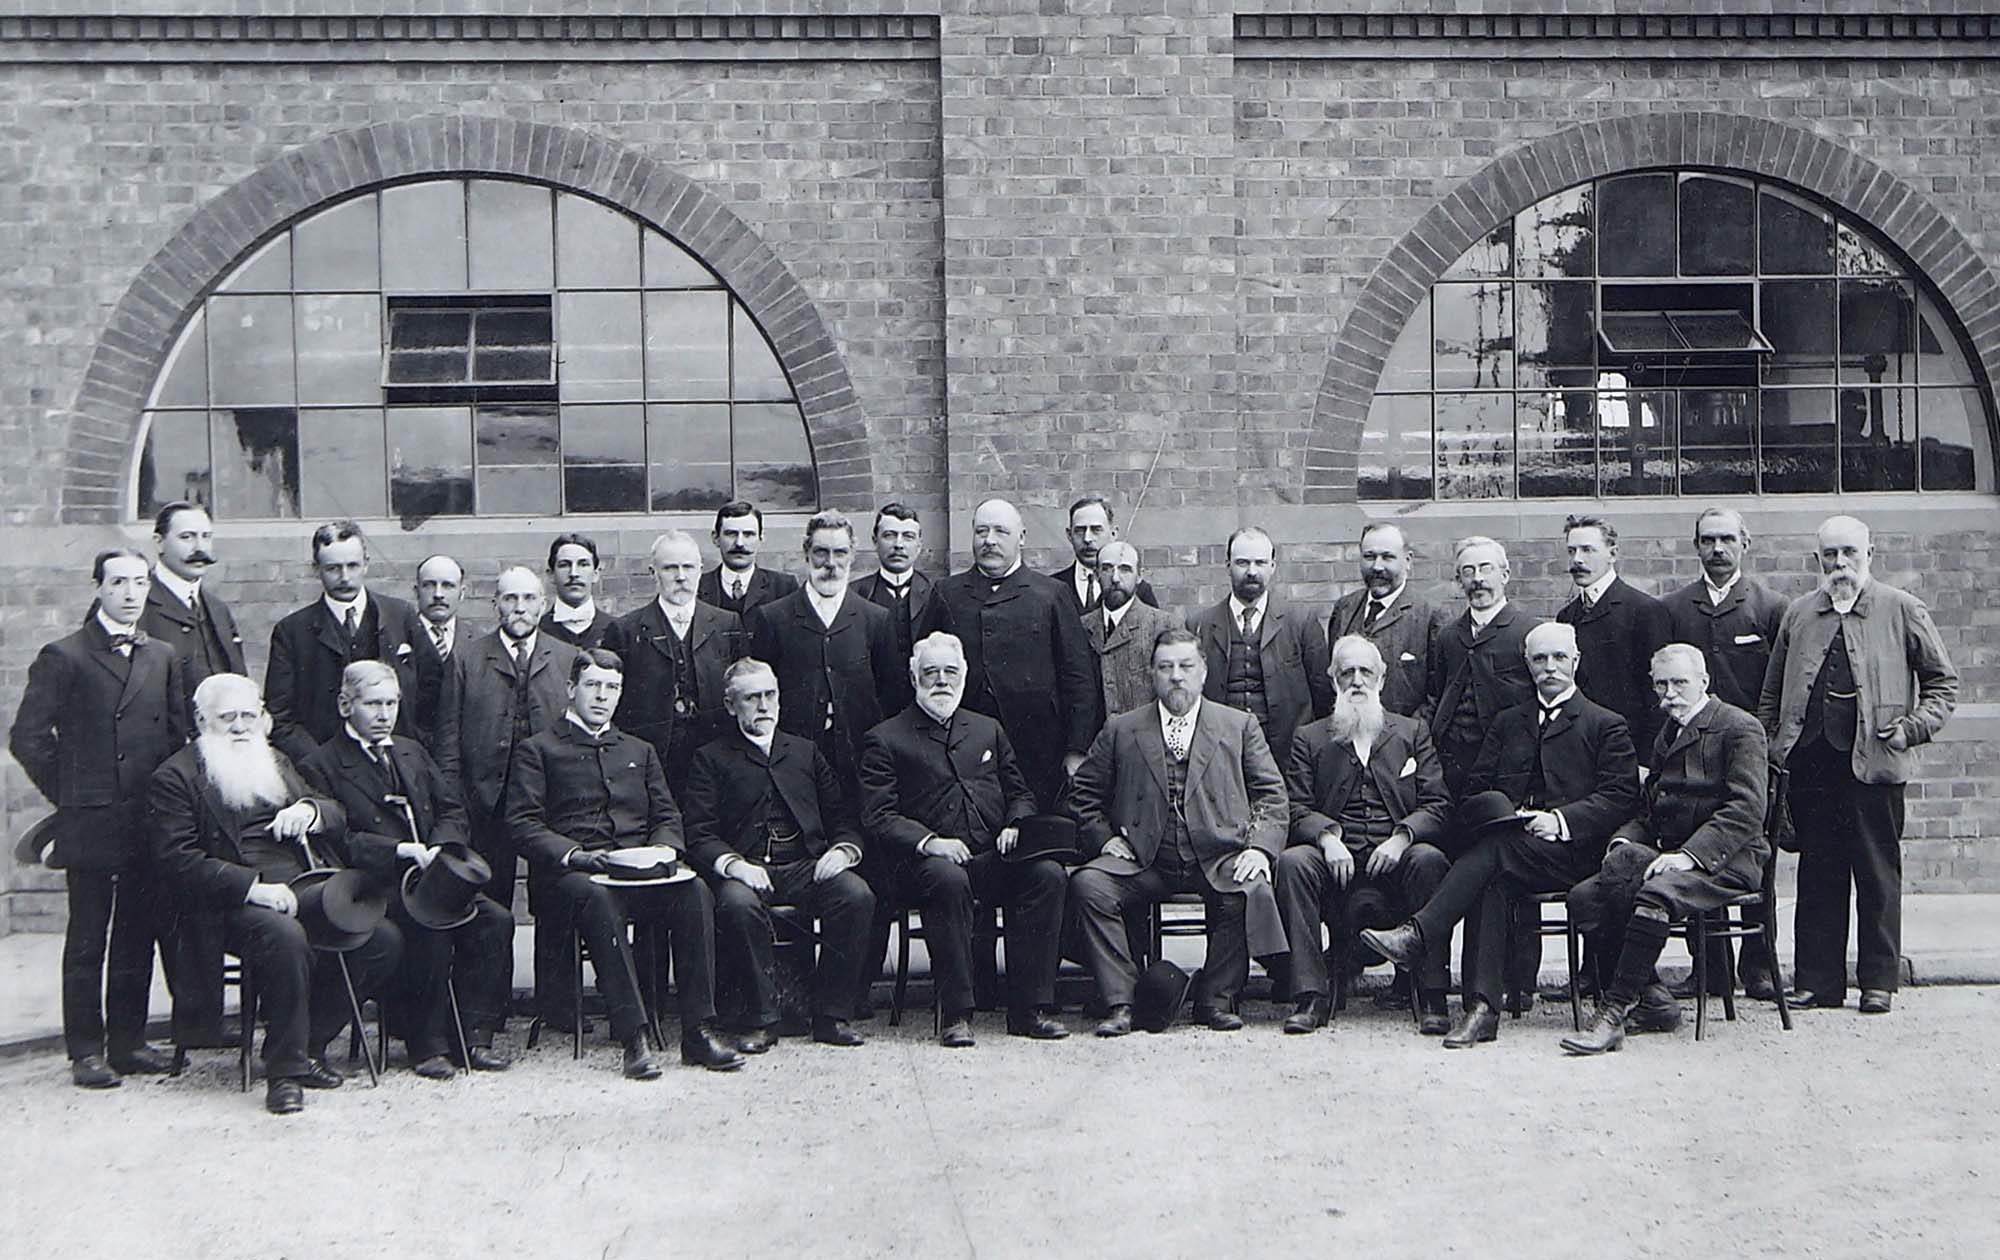 Representatives and people involved in the creation of the pumping station pose for a group photograph, 1891	Leicestershire Record Office - 